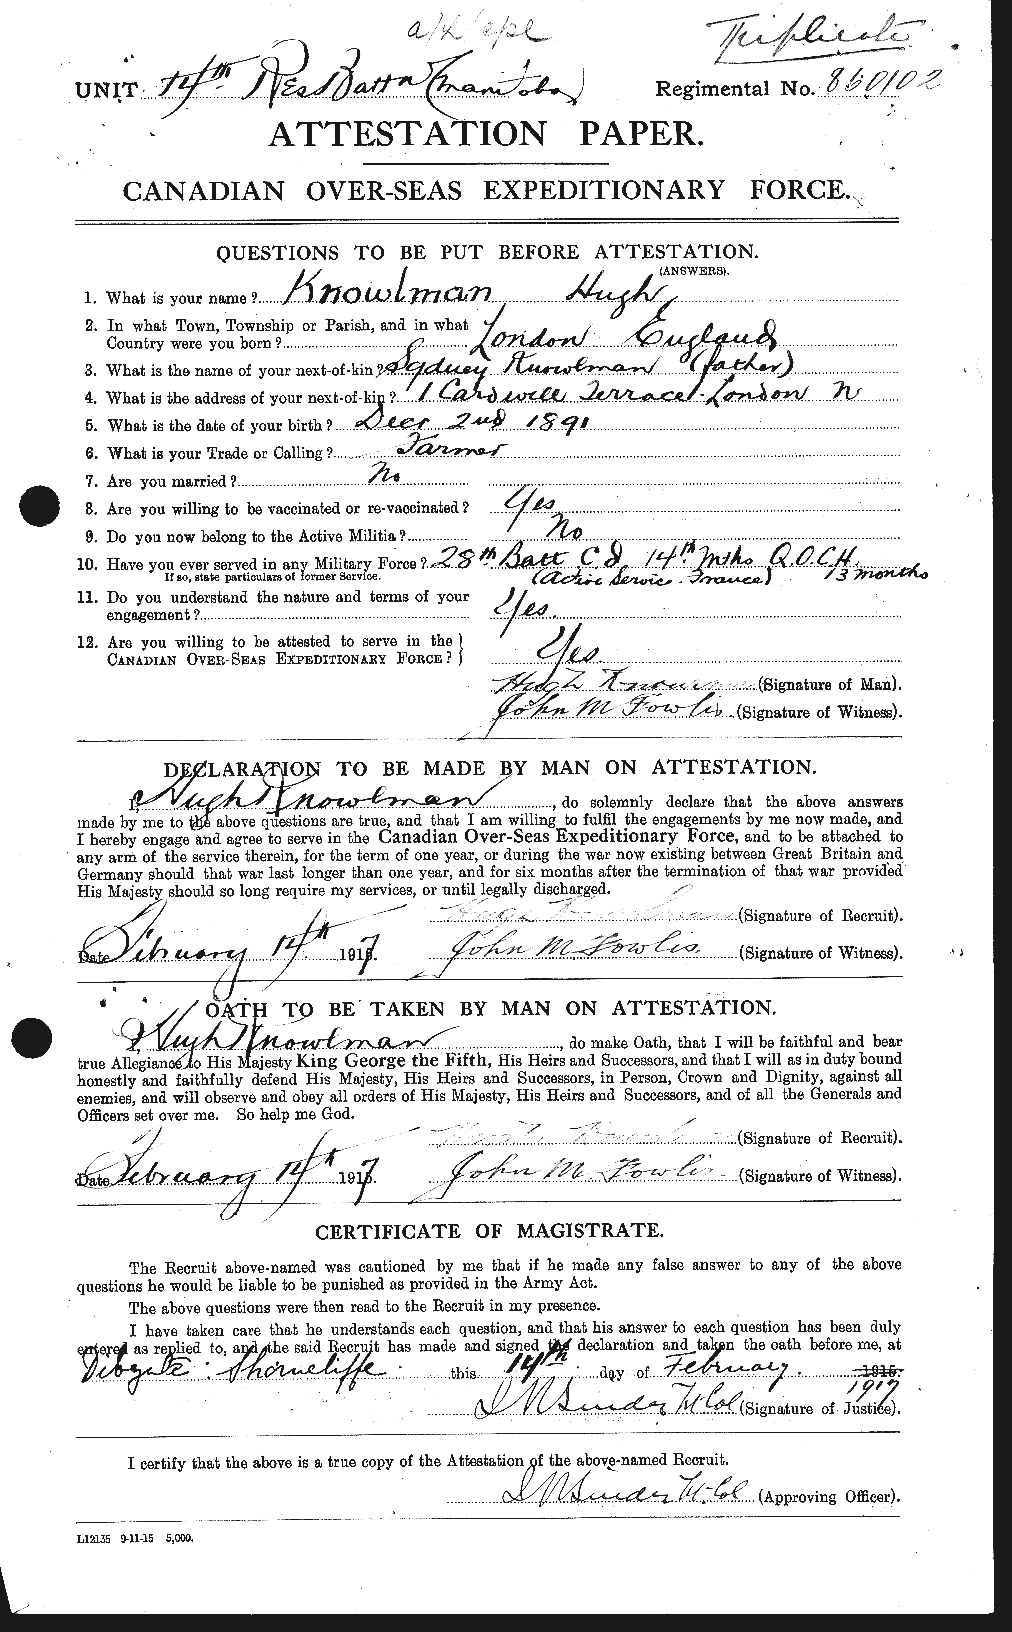 Personnel Records of the First World War - CEF 442754a